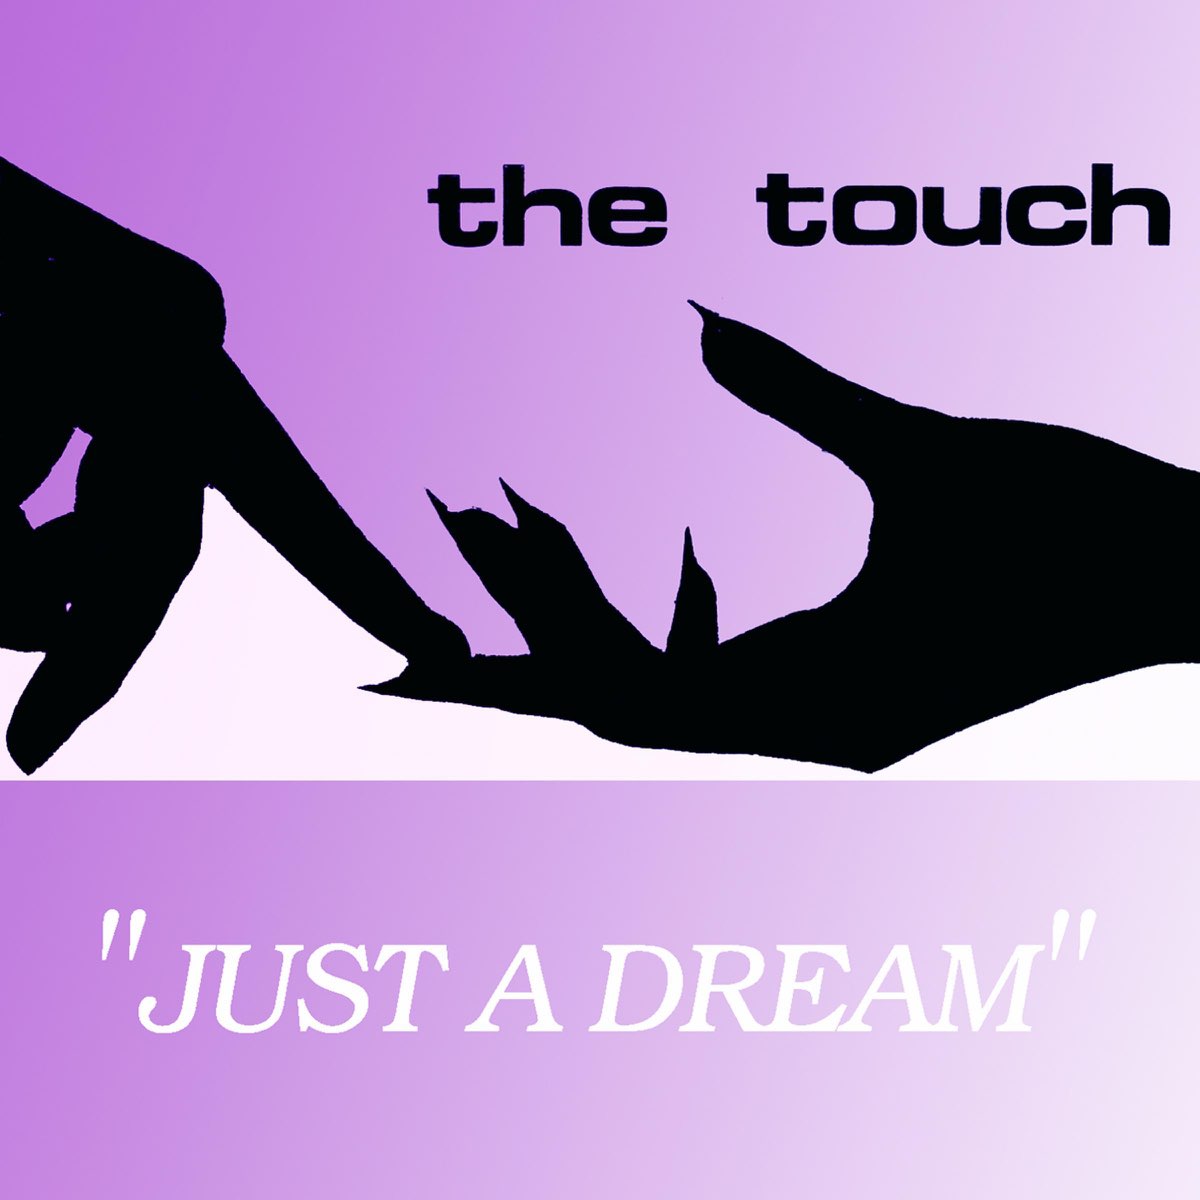 Touching song. Just Touch. Dream Touch. Touch песня. Just Touch картинка.